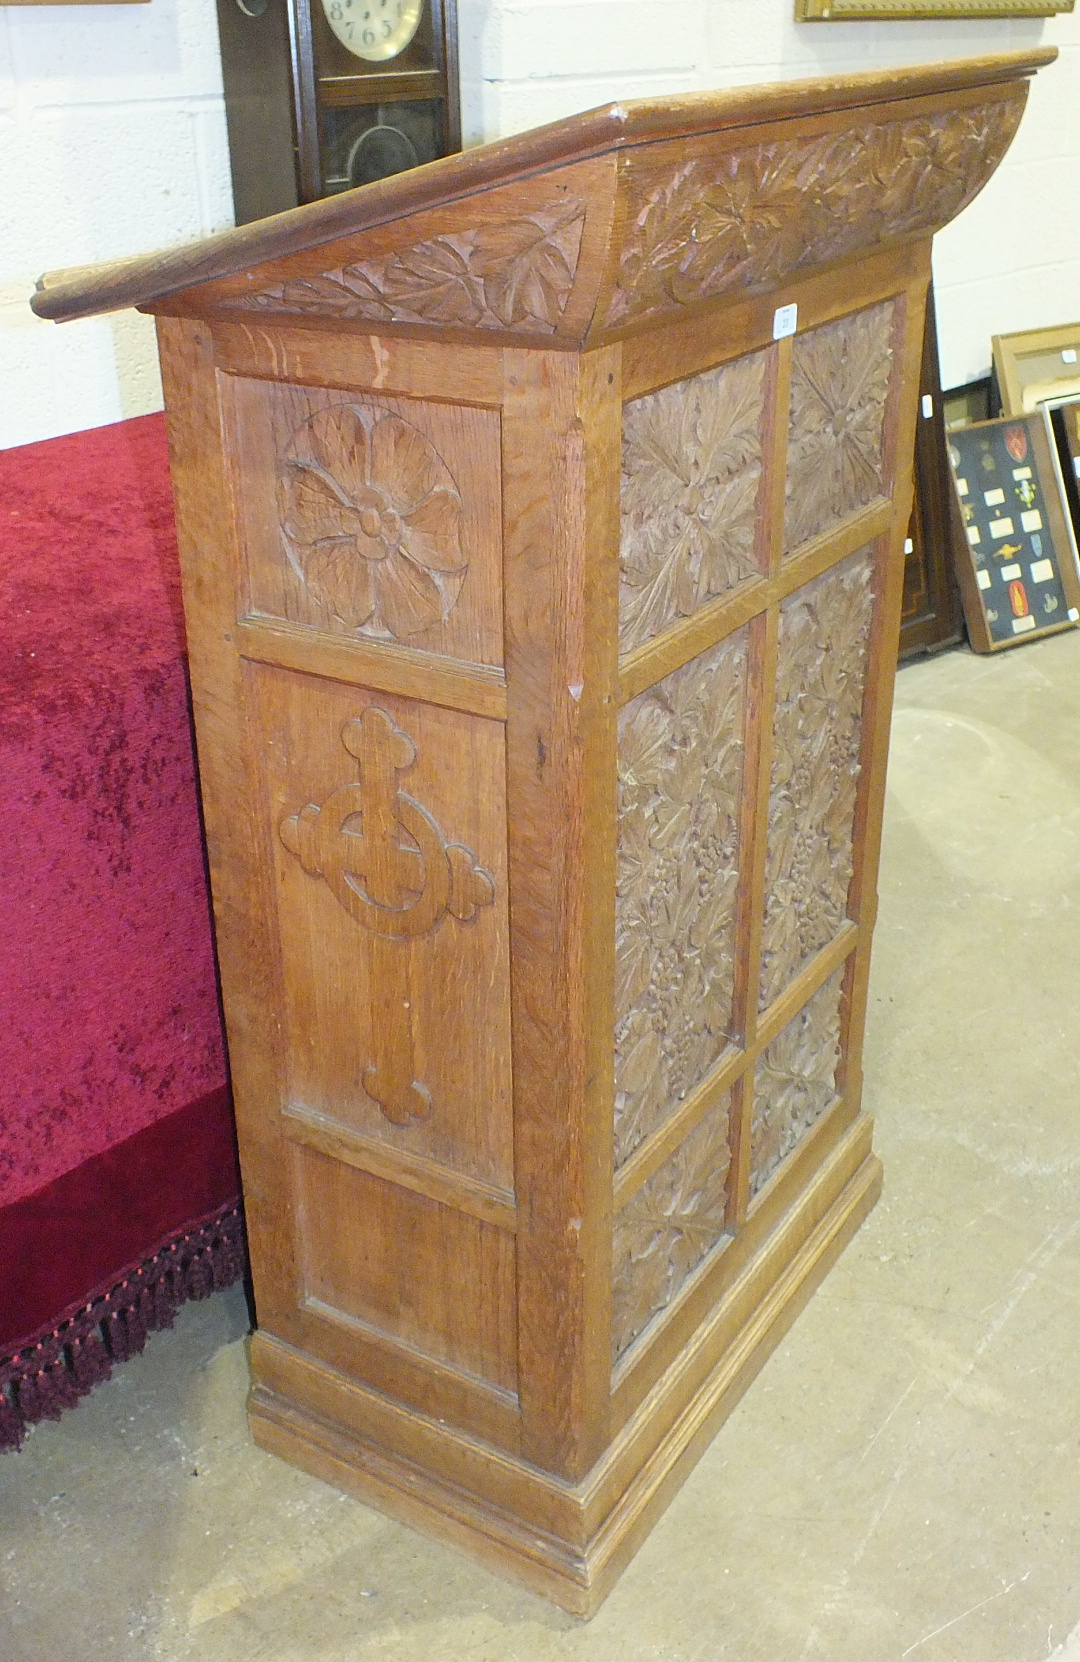 A carved oak lectern carved with acanthus and fruiting vines, the side panels carved with religious